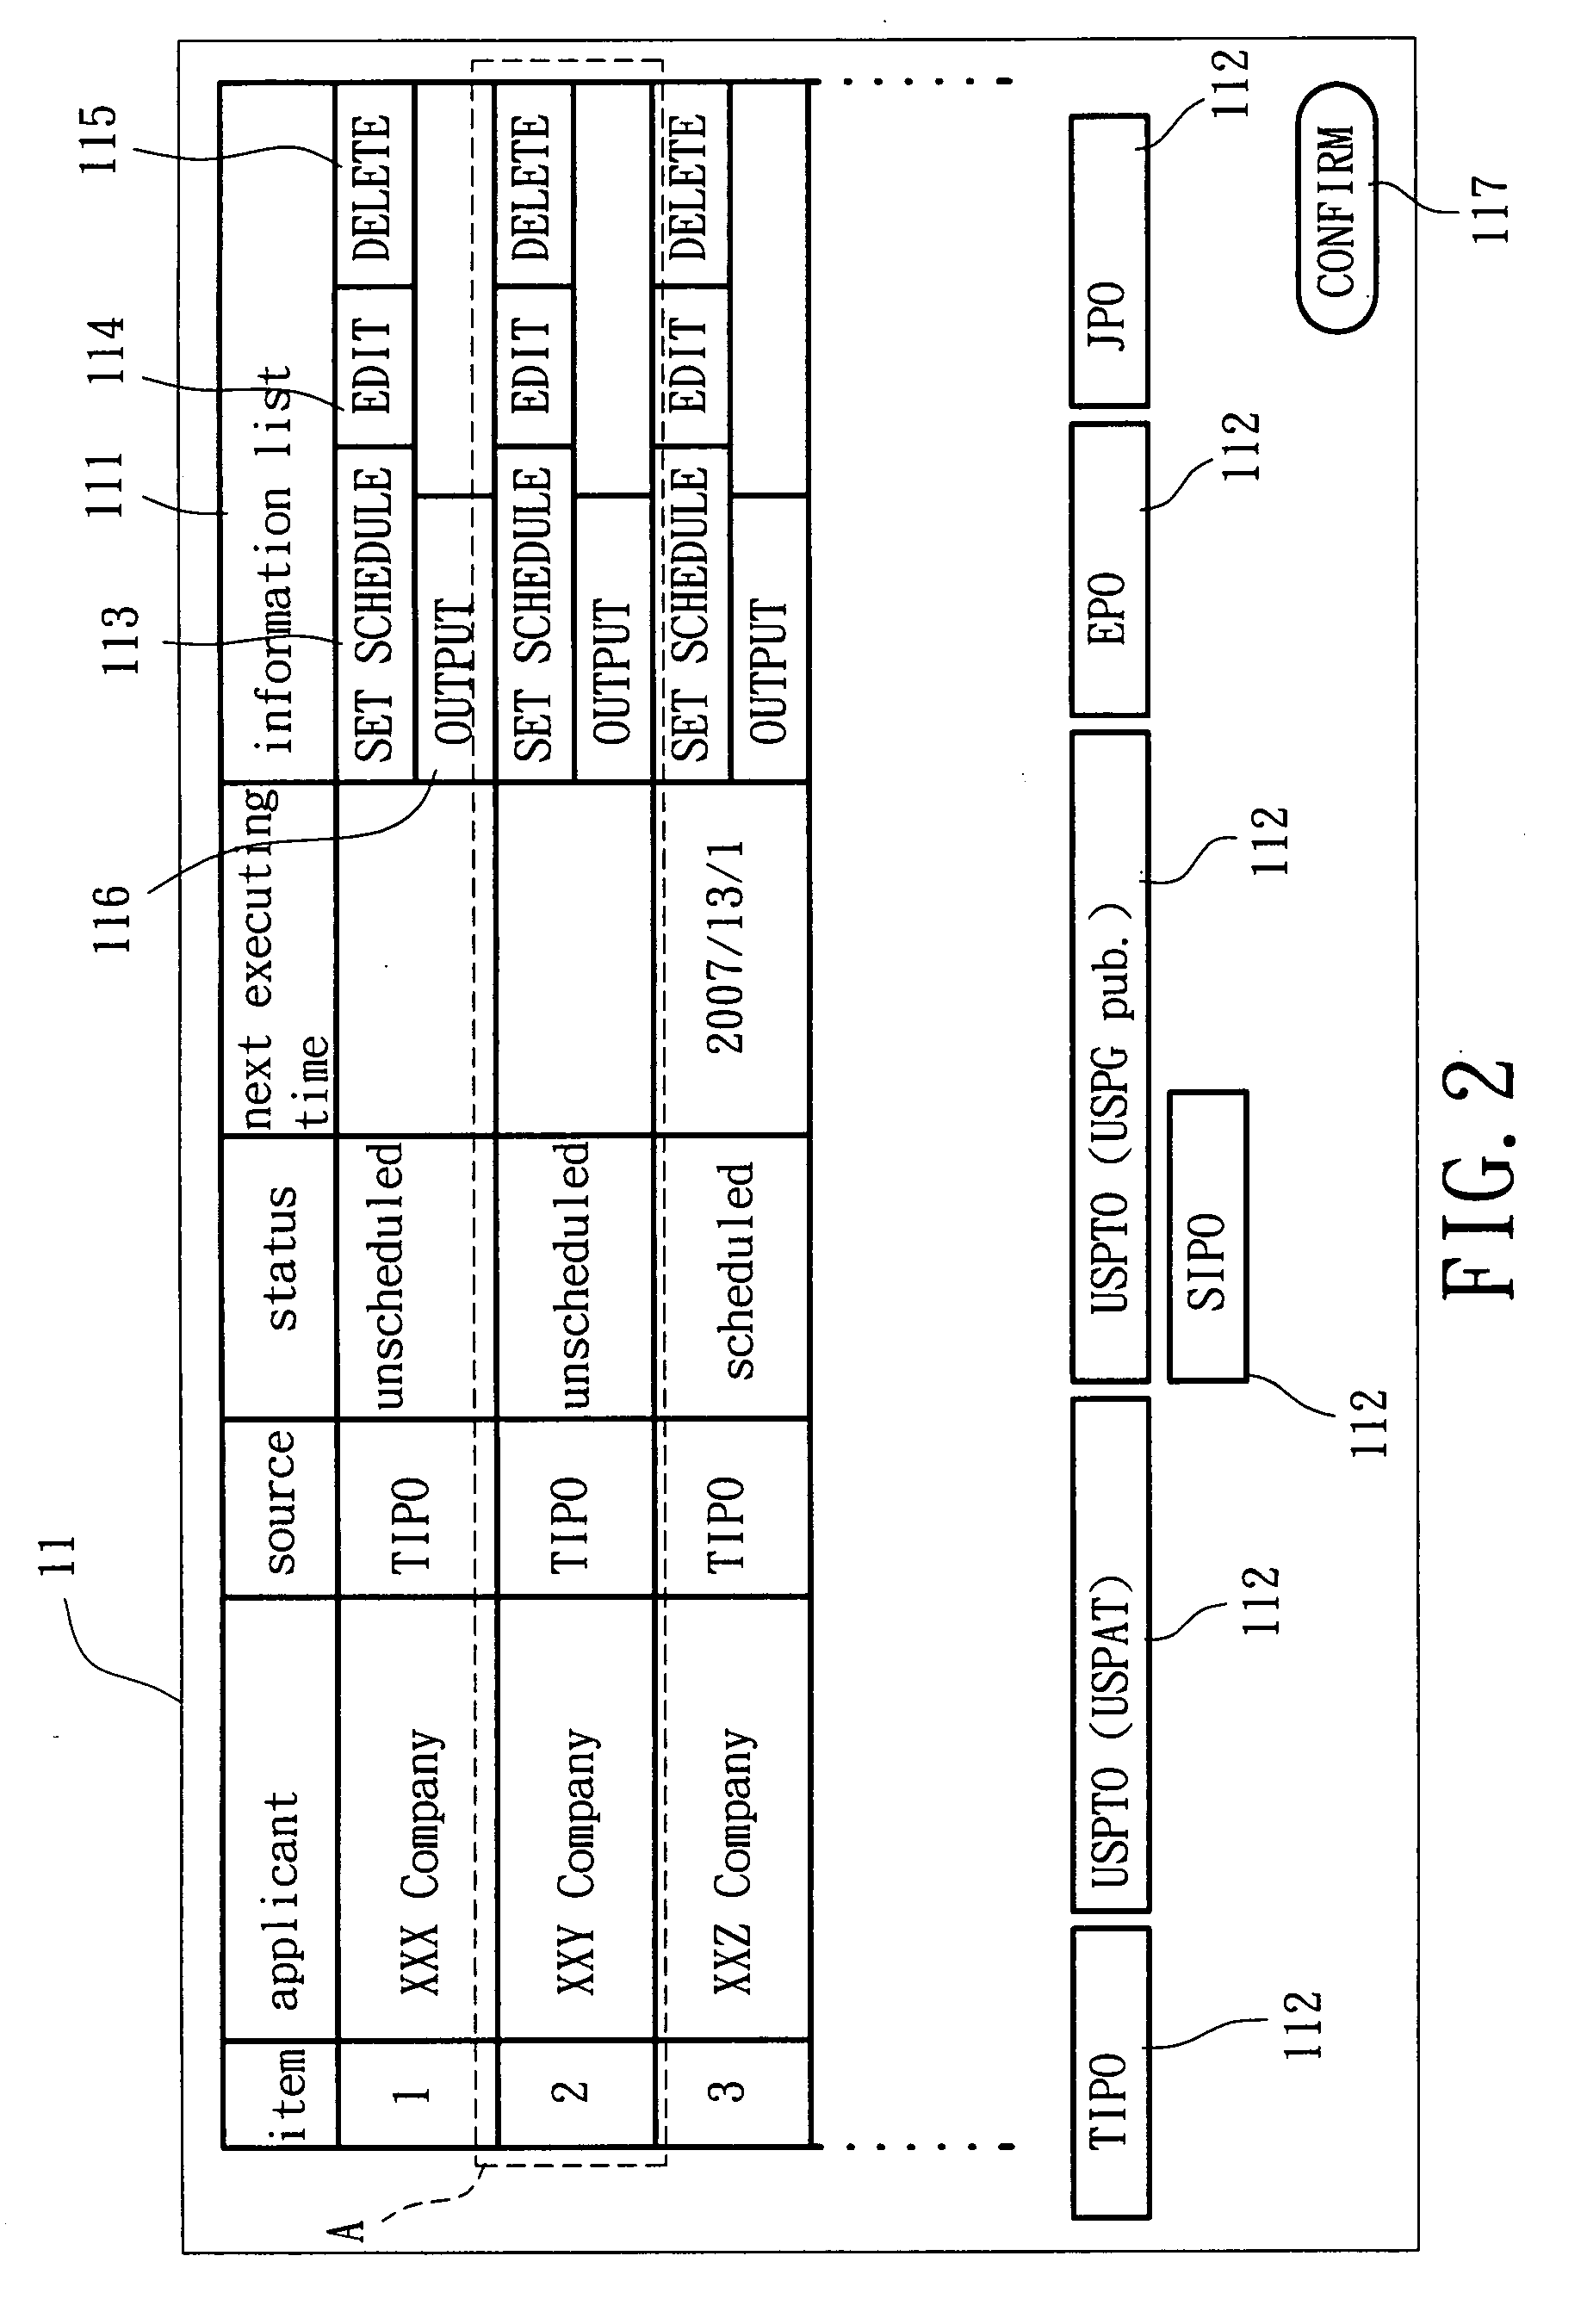 Patent searching method and patent searching system using the same